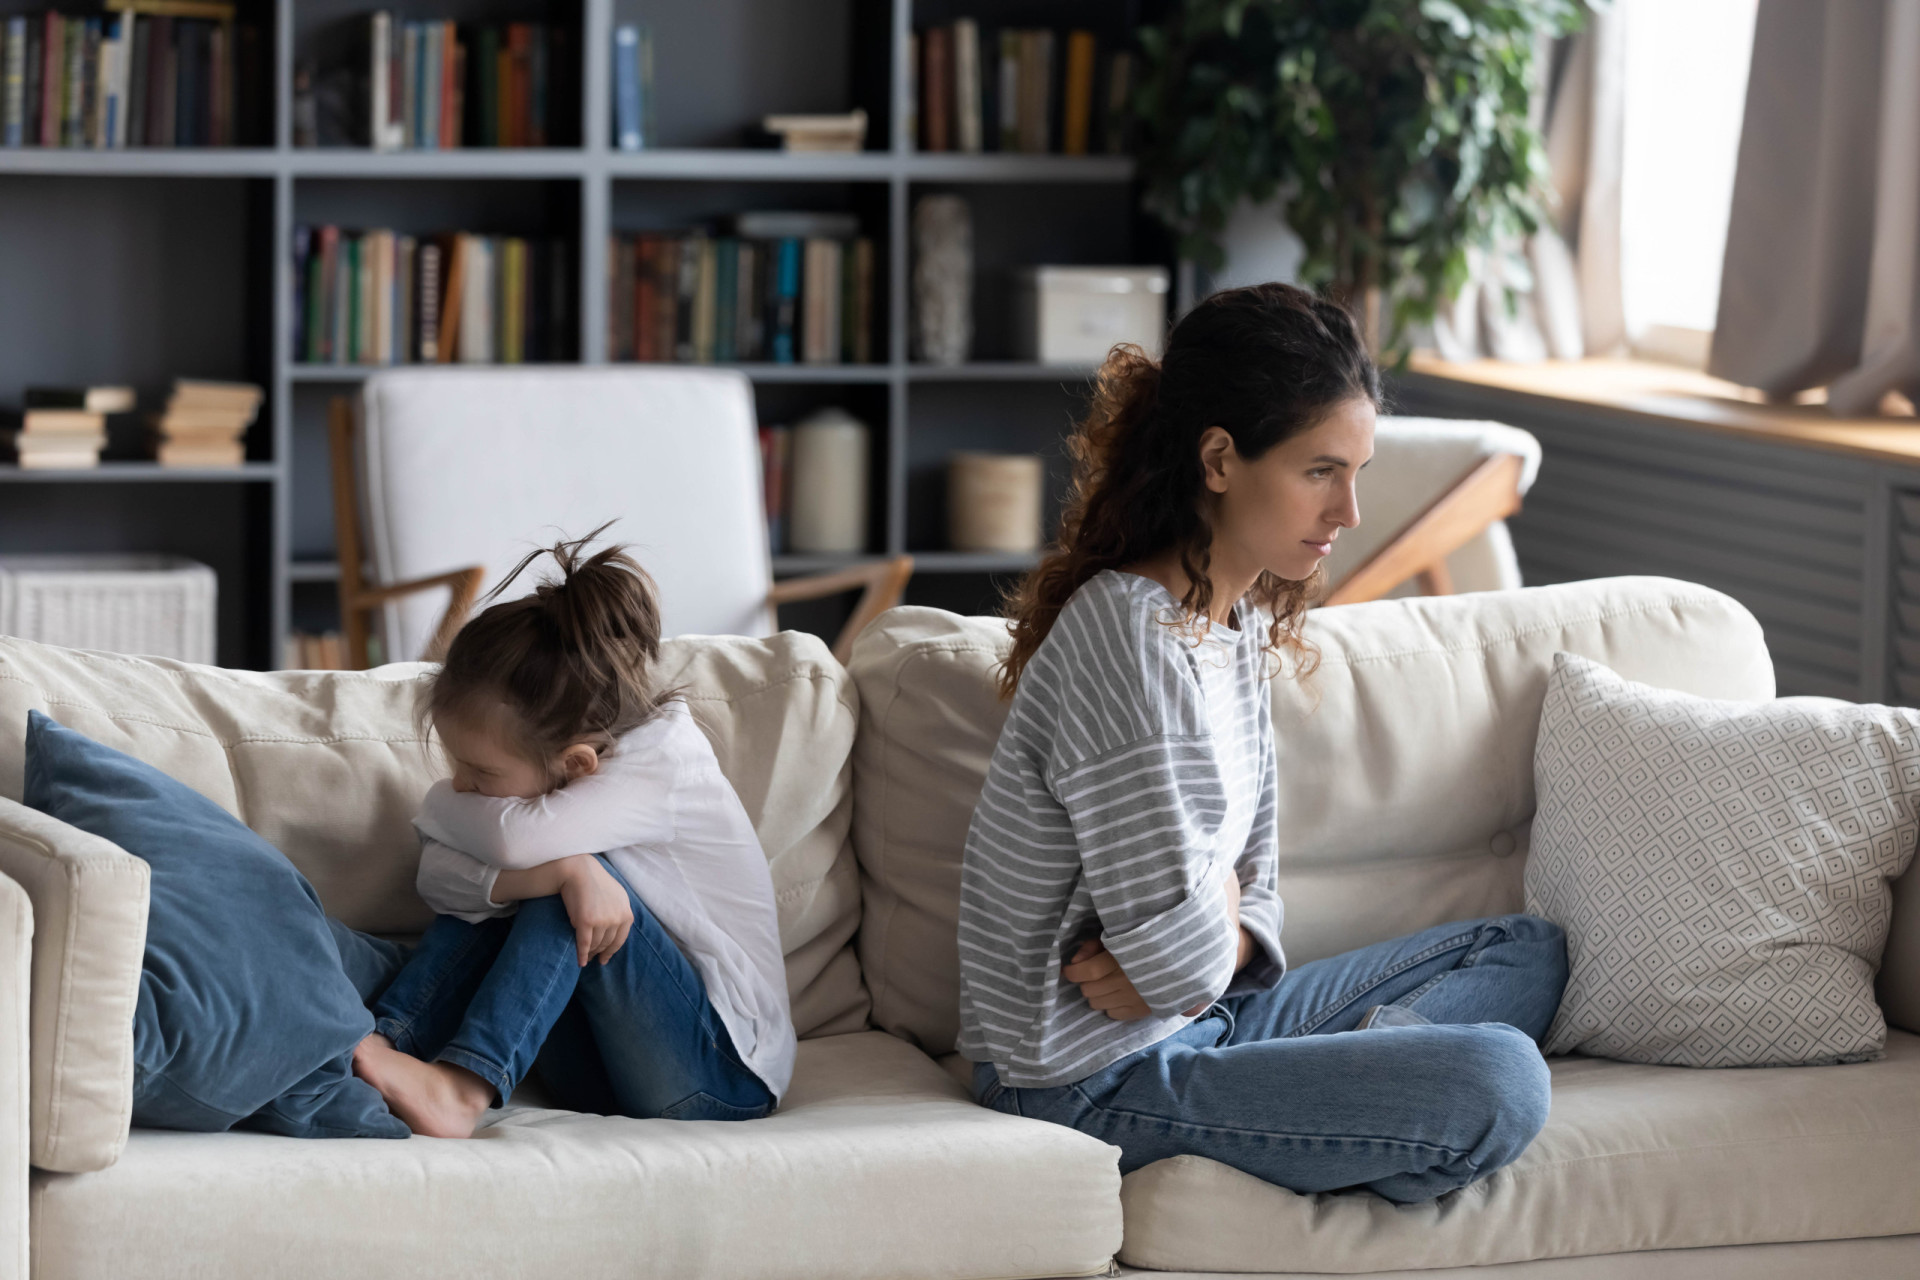 <p>Conversely, stay-at-home mom guilt can emerge with a mother's desire to spend time away from their children even while at home. You see, mom guilt is all about contradictions and expectations.</p><p>You may also like:<a href="https://www.starsinsider.com/n/283346?utm_source=msn.com&utm_medium=display&utm_campaign=referral_description&utm_content=548172en-en"> Scientists rank the mammals that make the best human companions</a></p>